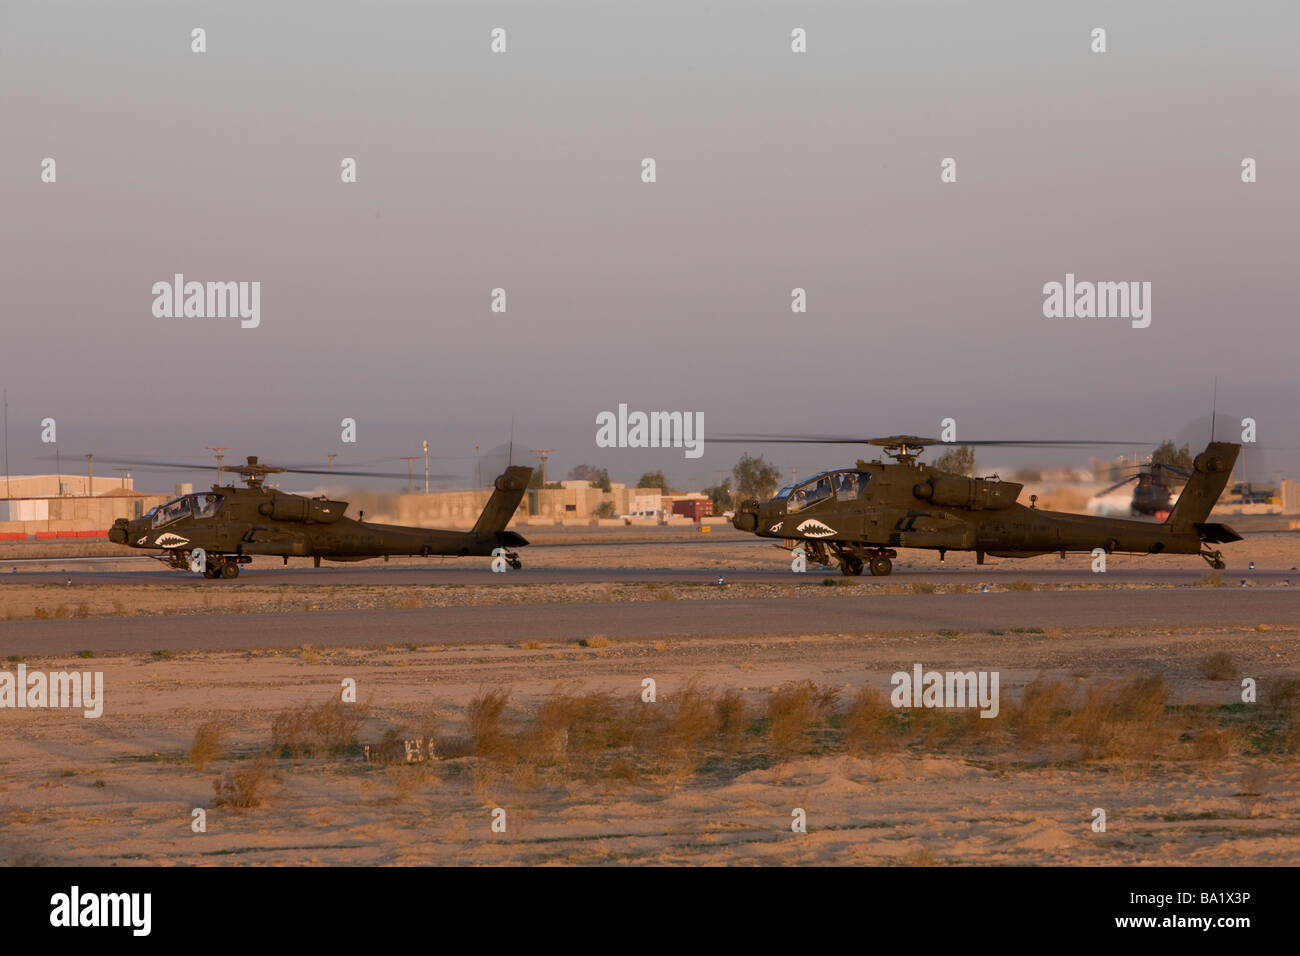 Tikrit, Iraq - A pair of AH-64 Apache helicopters prepare for takeoff. Stock Photo